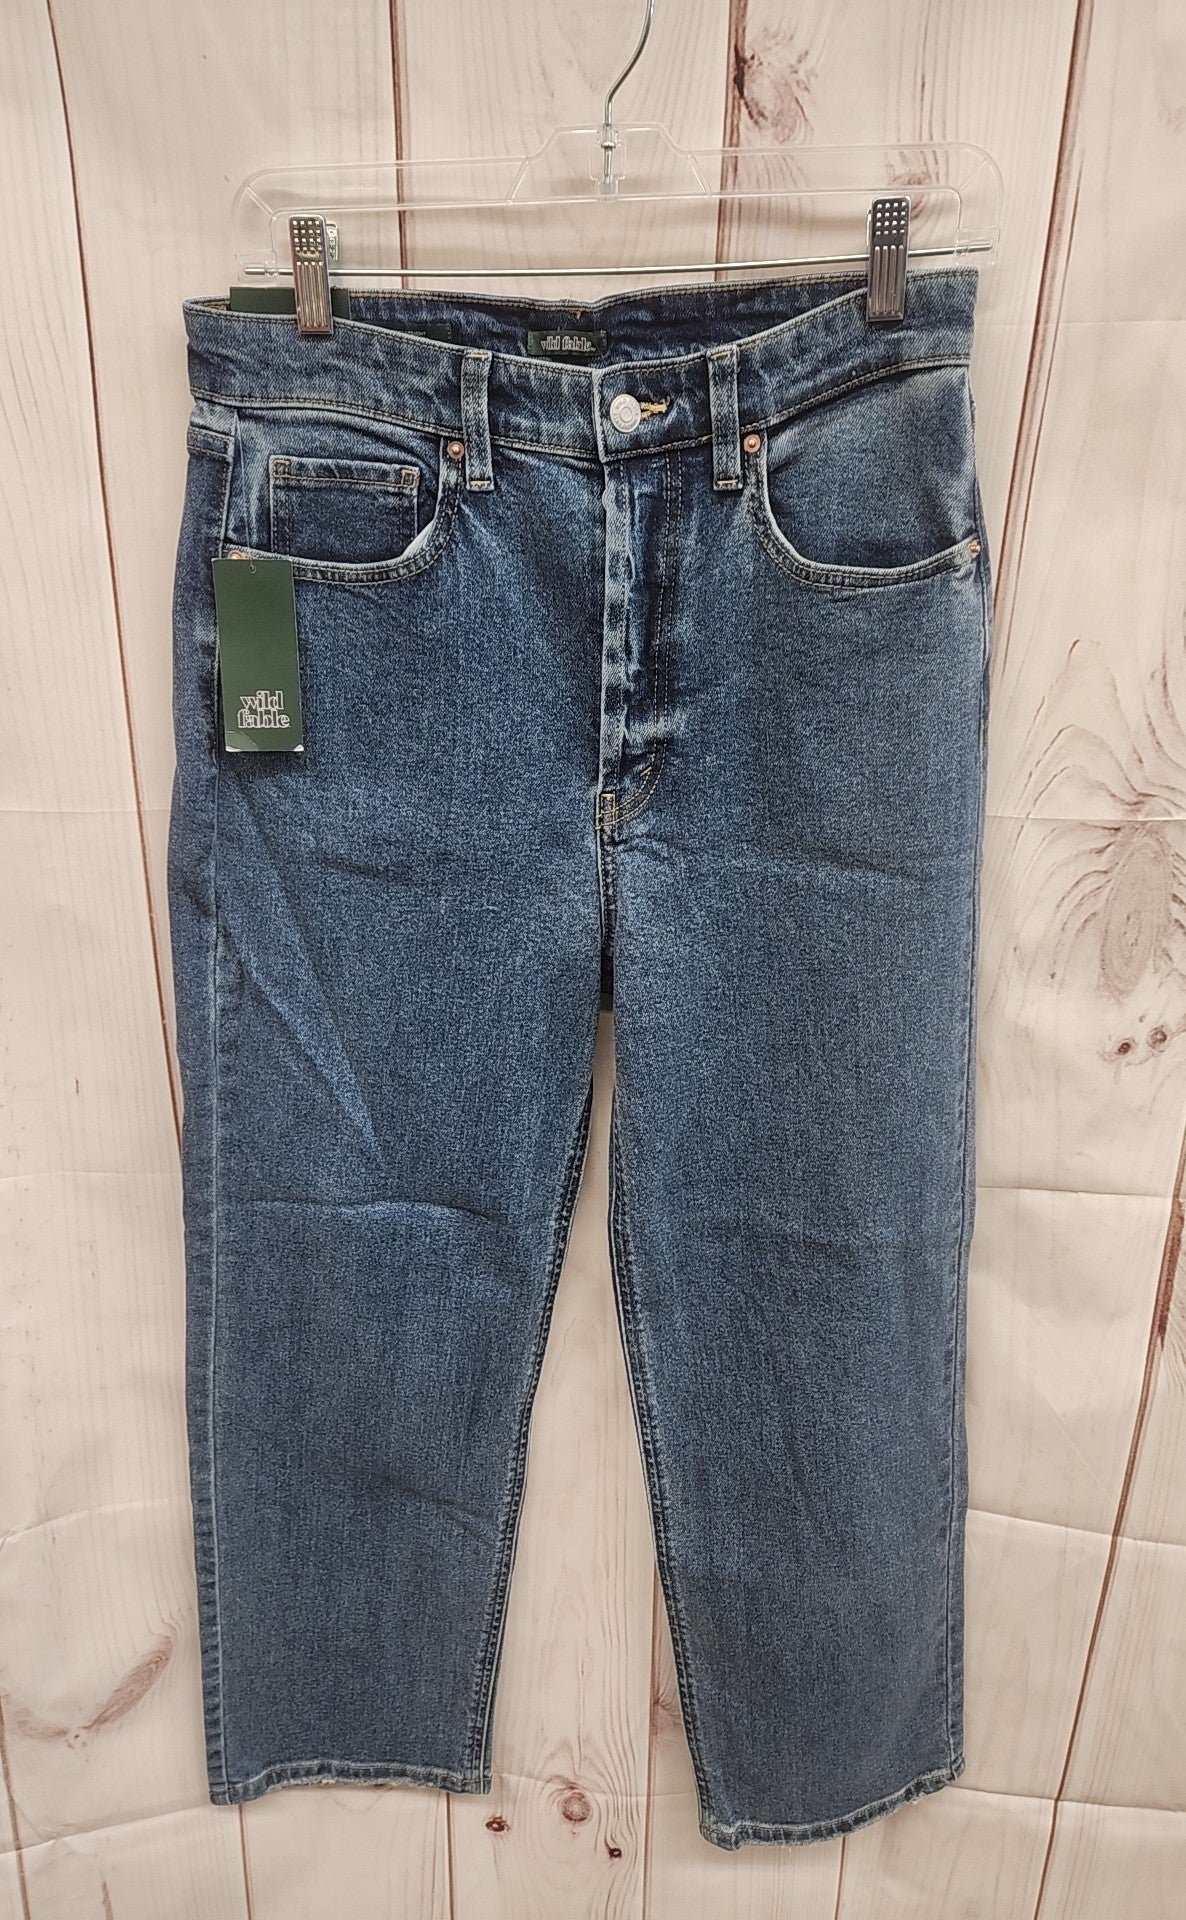 Wild Fable Women's Size 29 (7-8) Highest Rise Straight Blue Jeans NWT